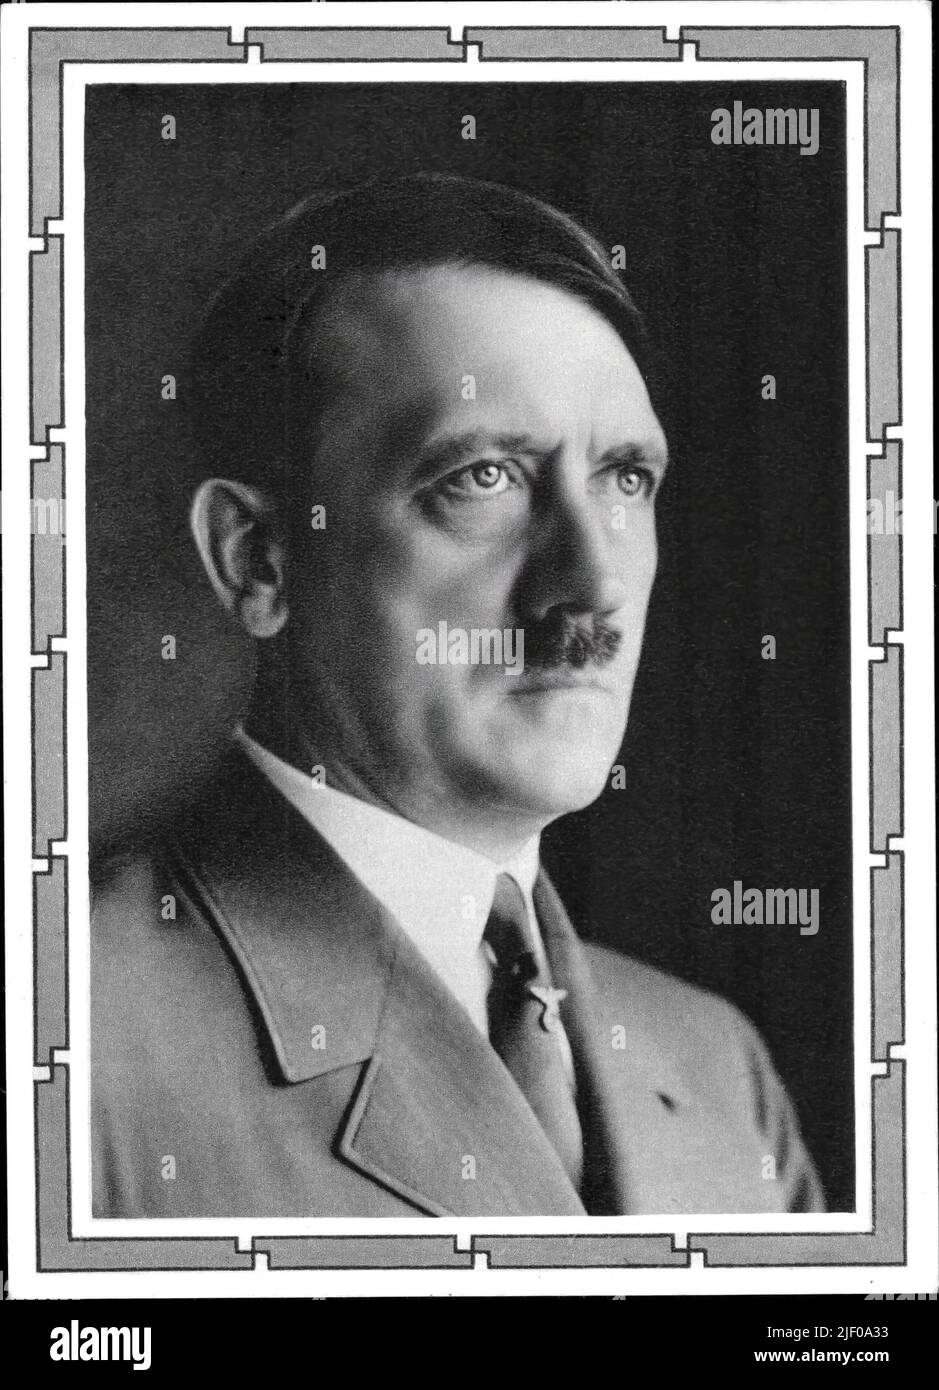 ADOLF HITLER 1930's official Studio Hoffmann Portrait in original swastika theme frame overlay of Fuhrer Adolf Hitler propaganda image in Nazi Germany for posters and postcards Stock Photo